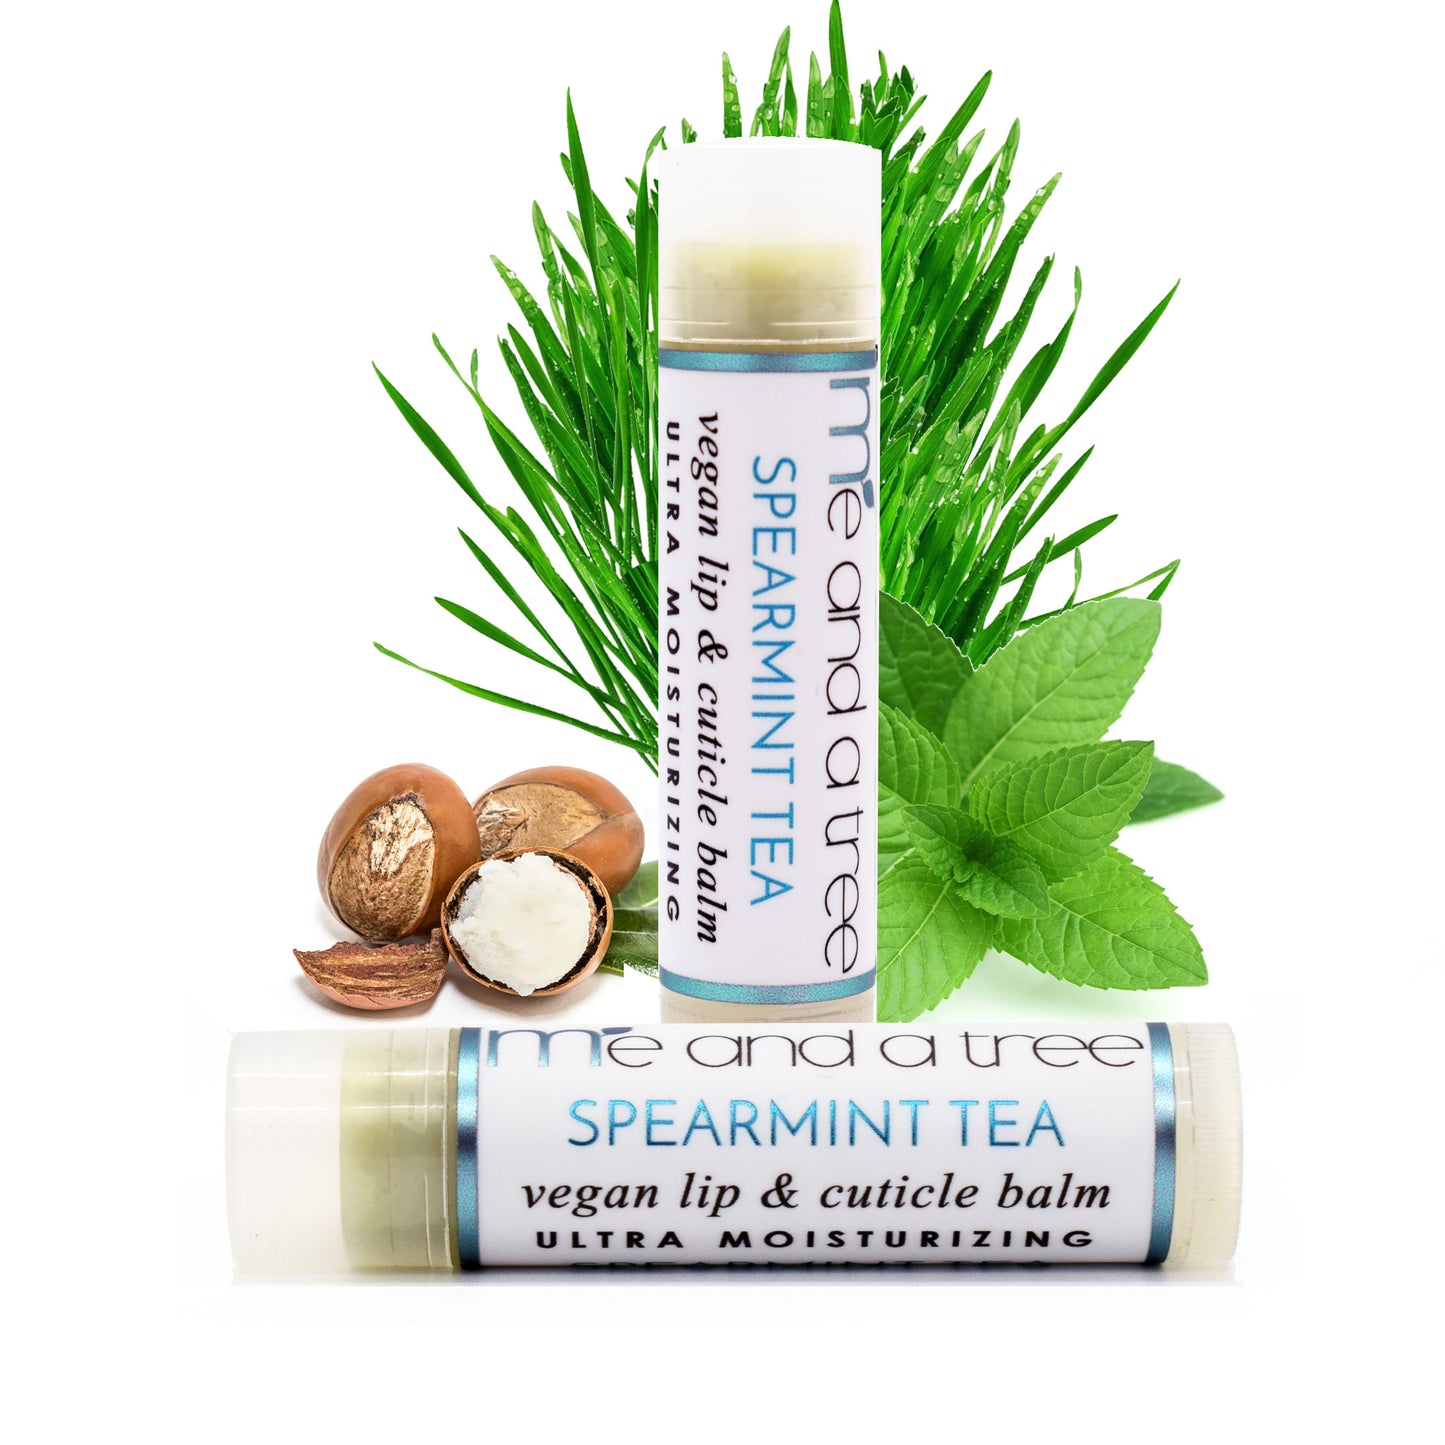 Best Spearmint Tea Natural Lip Cuticle Balm Vegan Organic By Me and a Tree Skincare